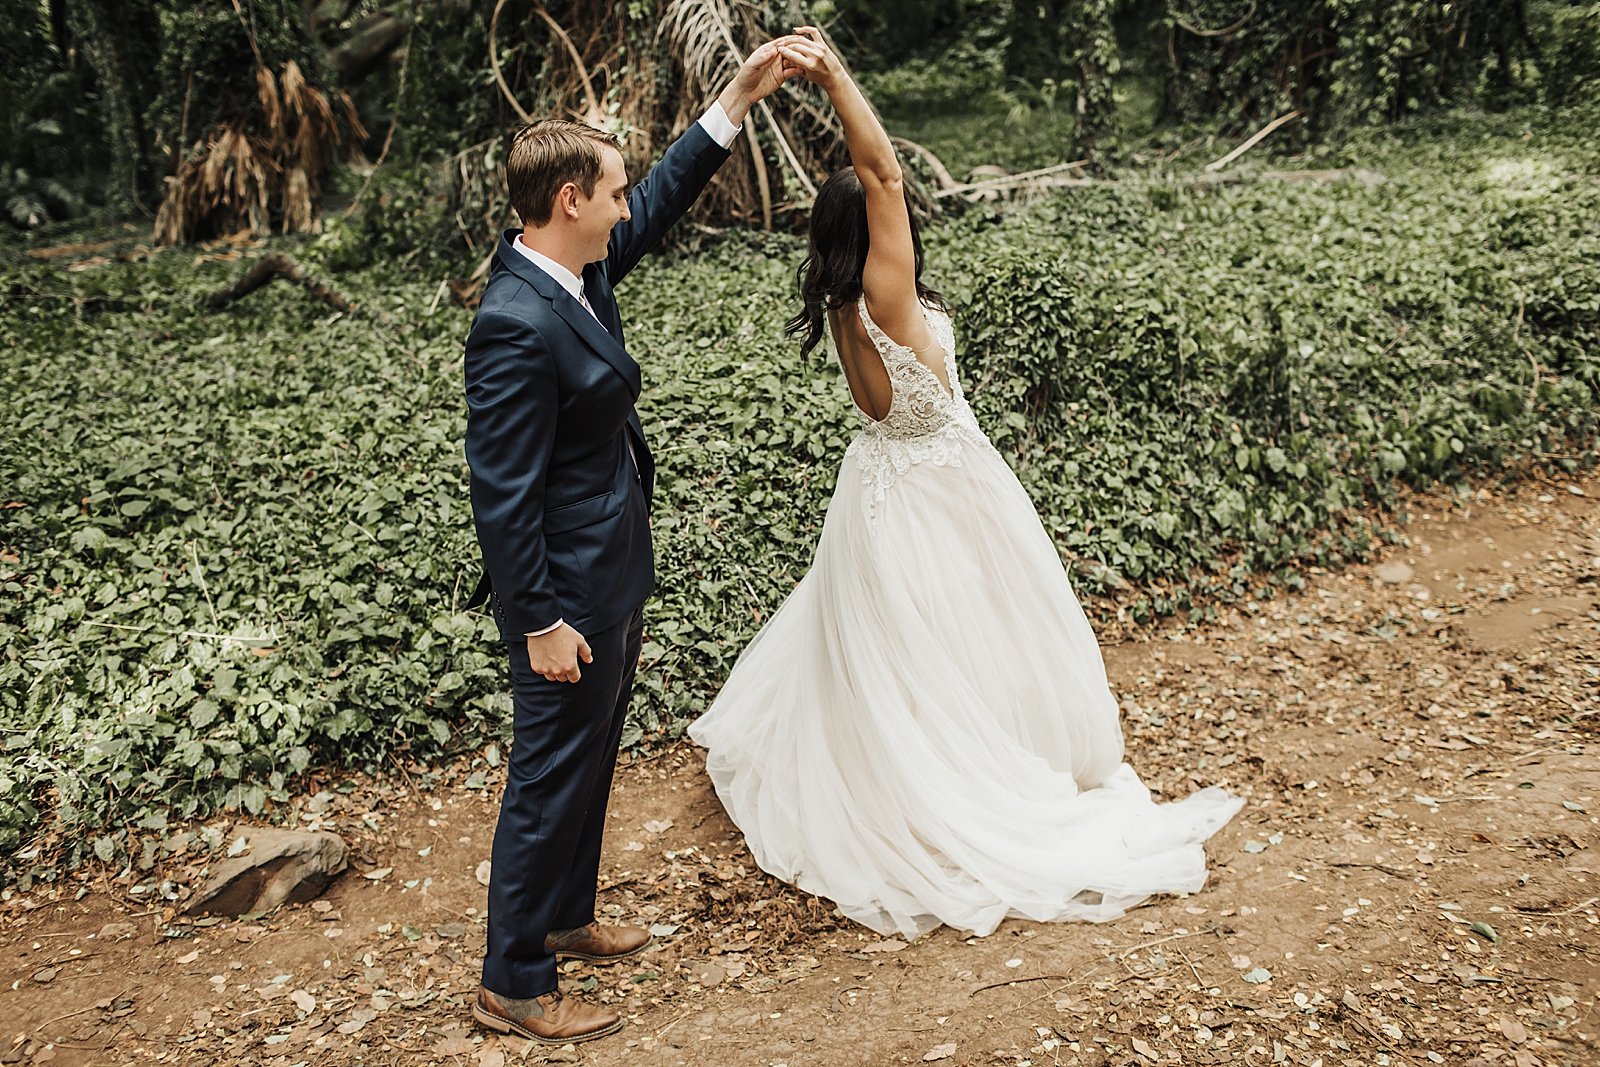 Bride twirling by Groom's hand by greenery